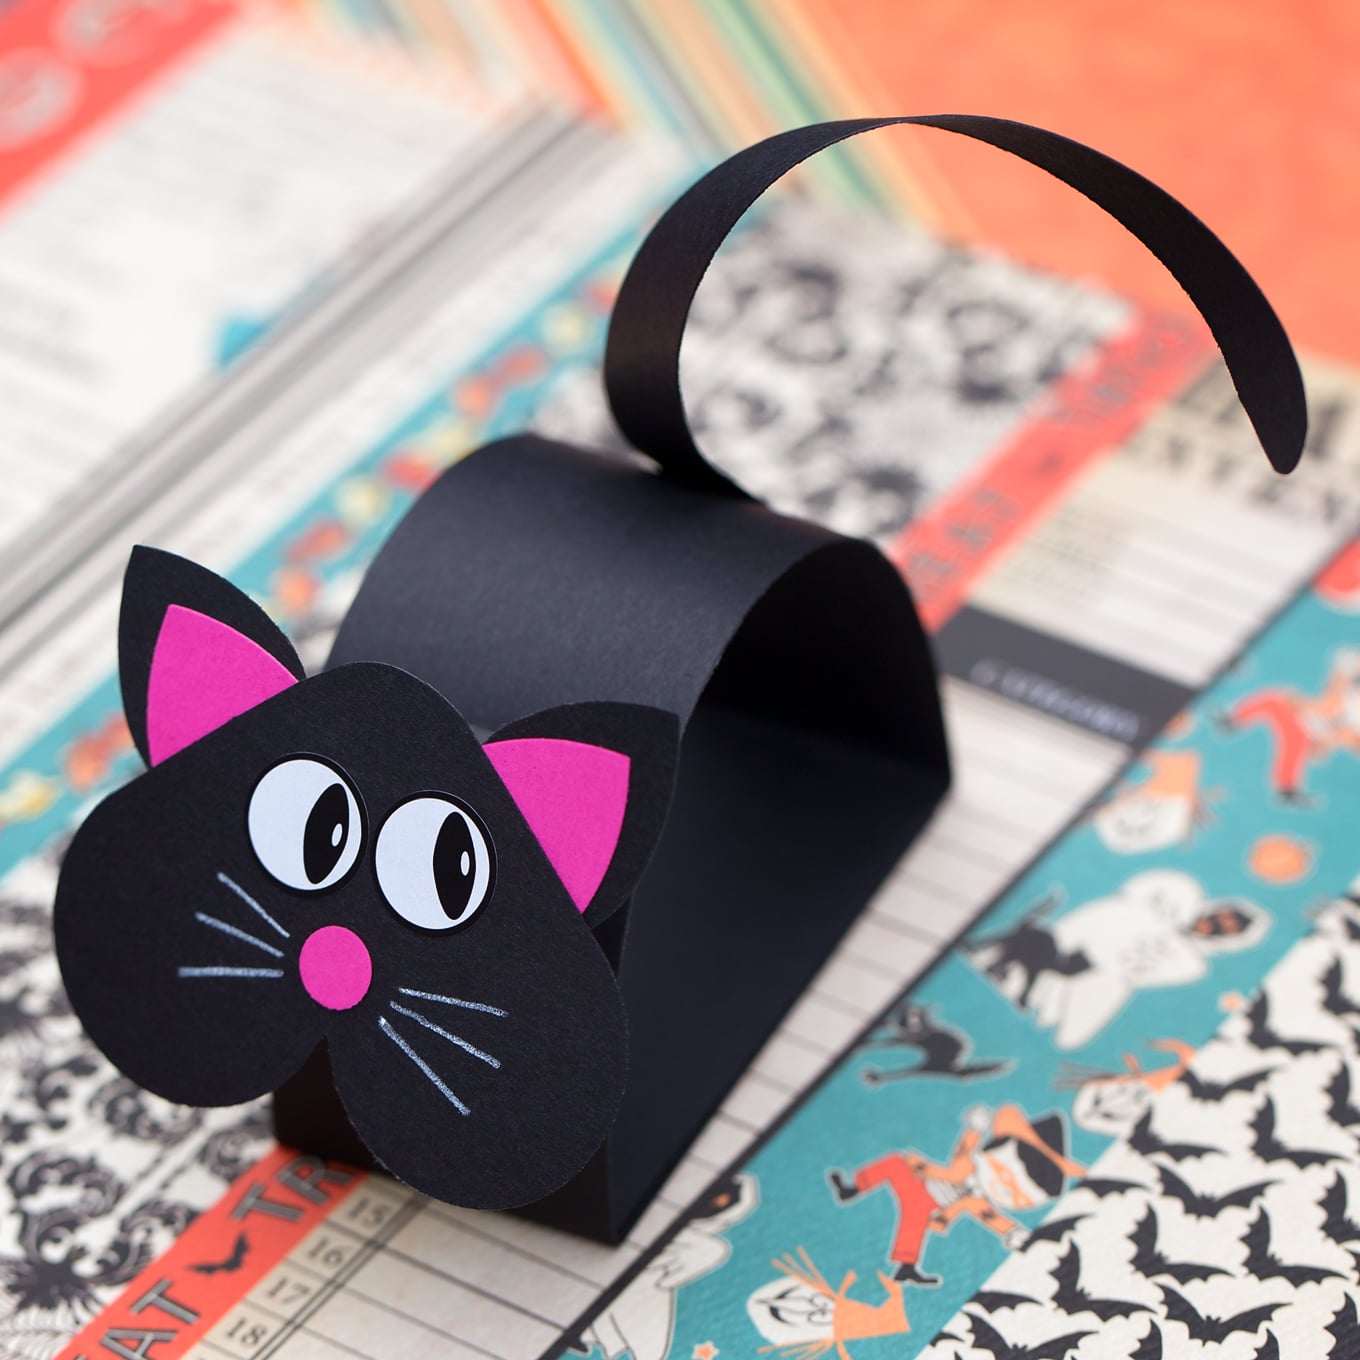 How to Make a Cute Black Cat Craft for Halloween